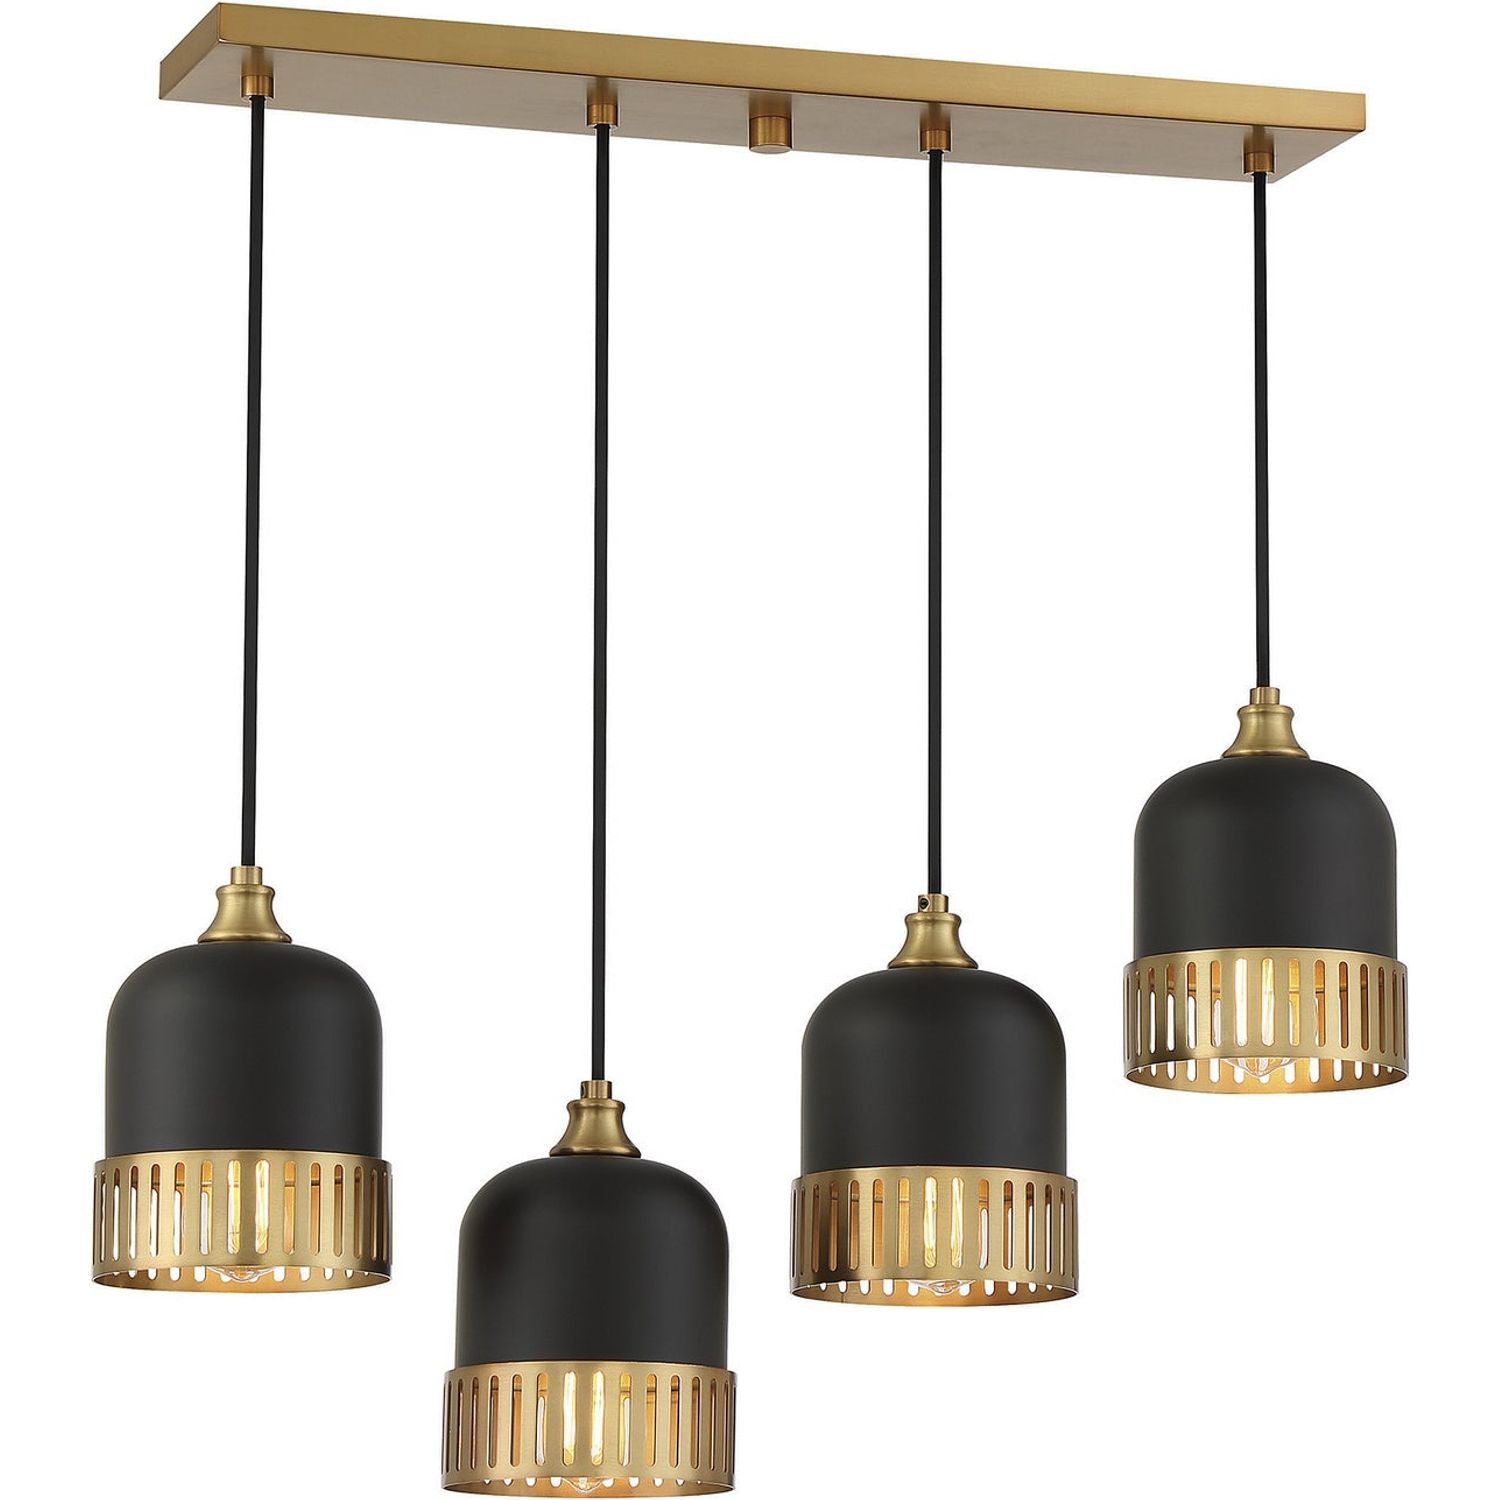 Savoy House - 1-1811-4-143 - Four Light Linear Chandelier - Eclipse - Matte Black with Warm Brass Accents